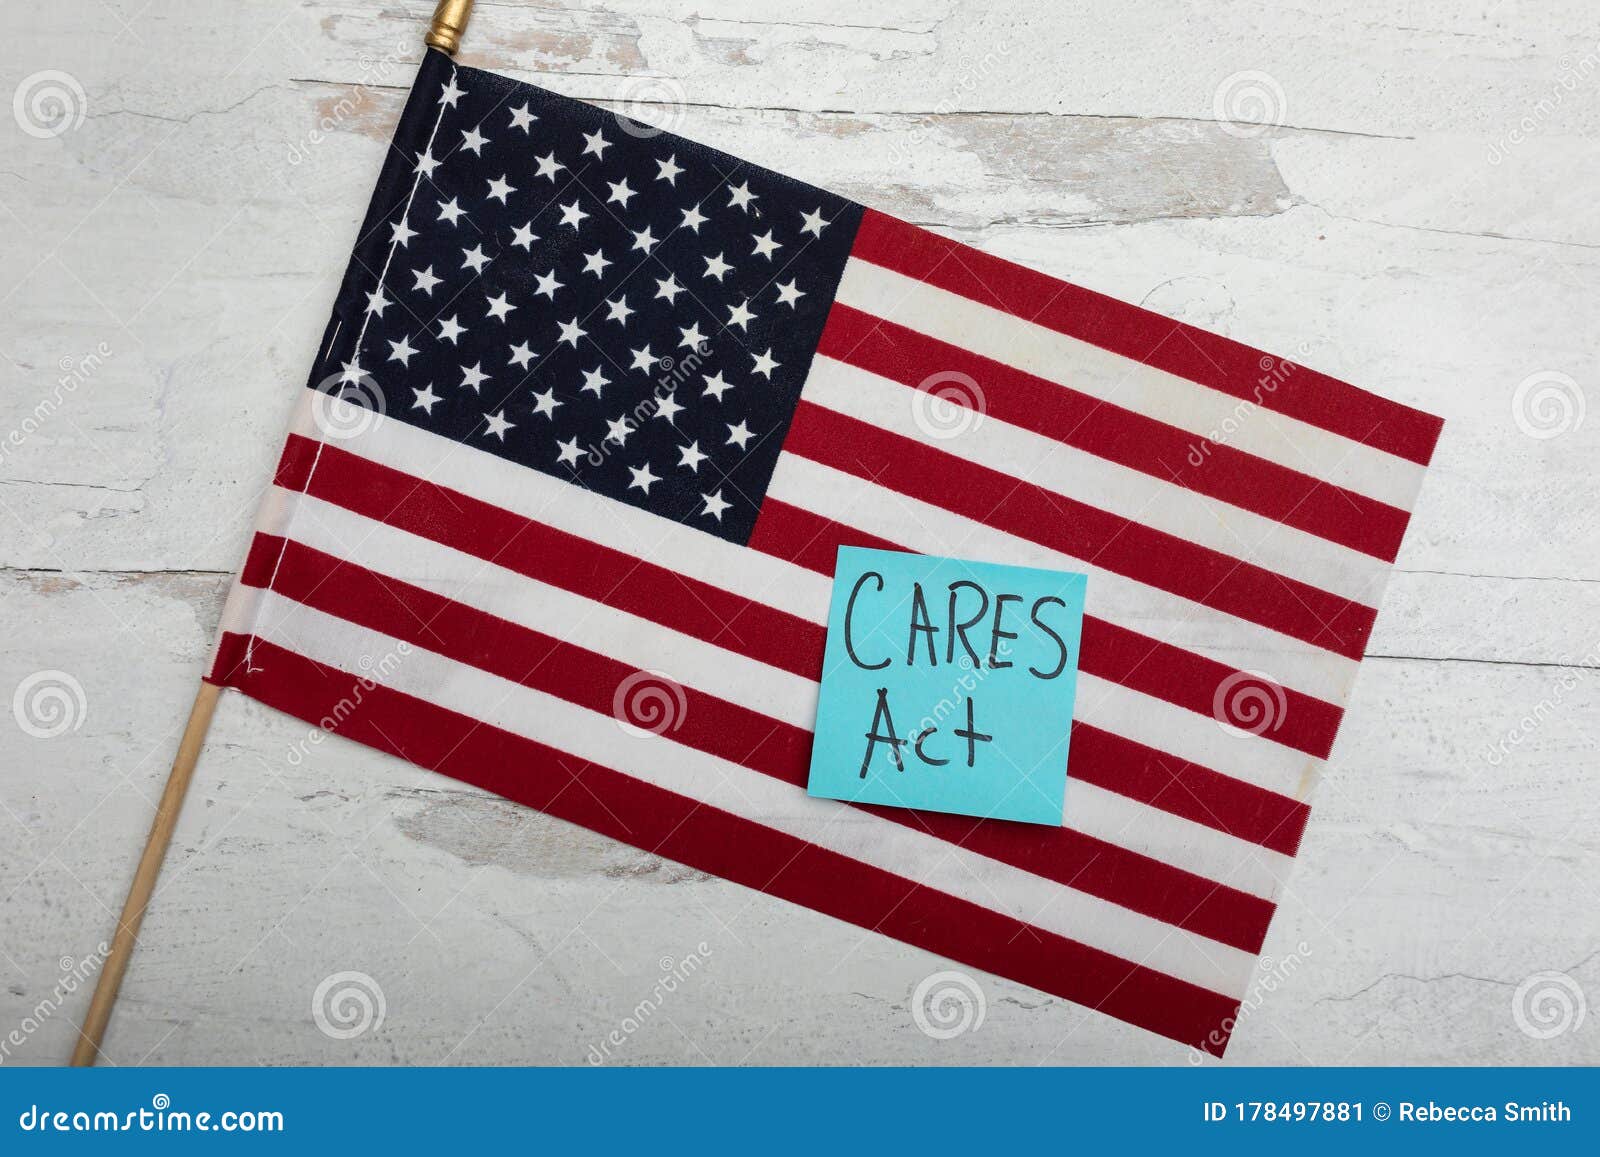 cares act on blue posted note sitting on large american flag